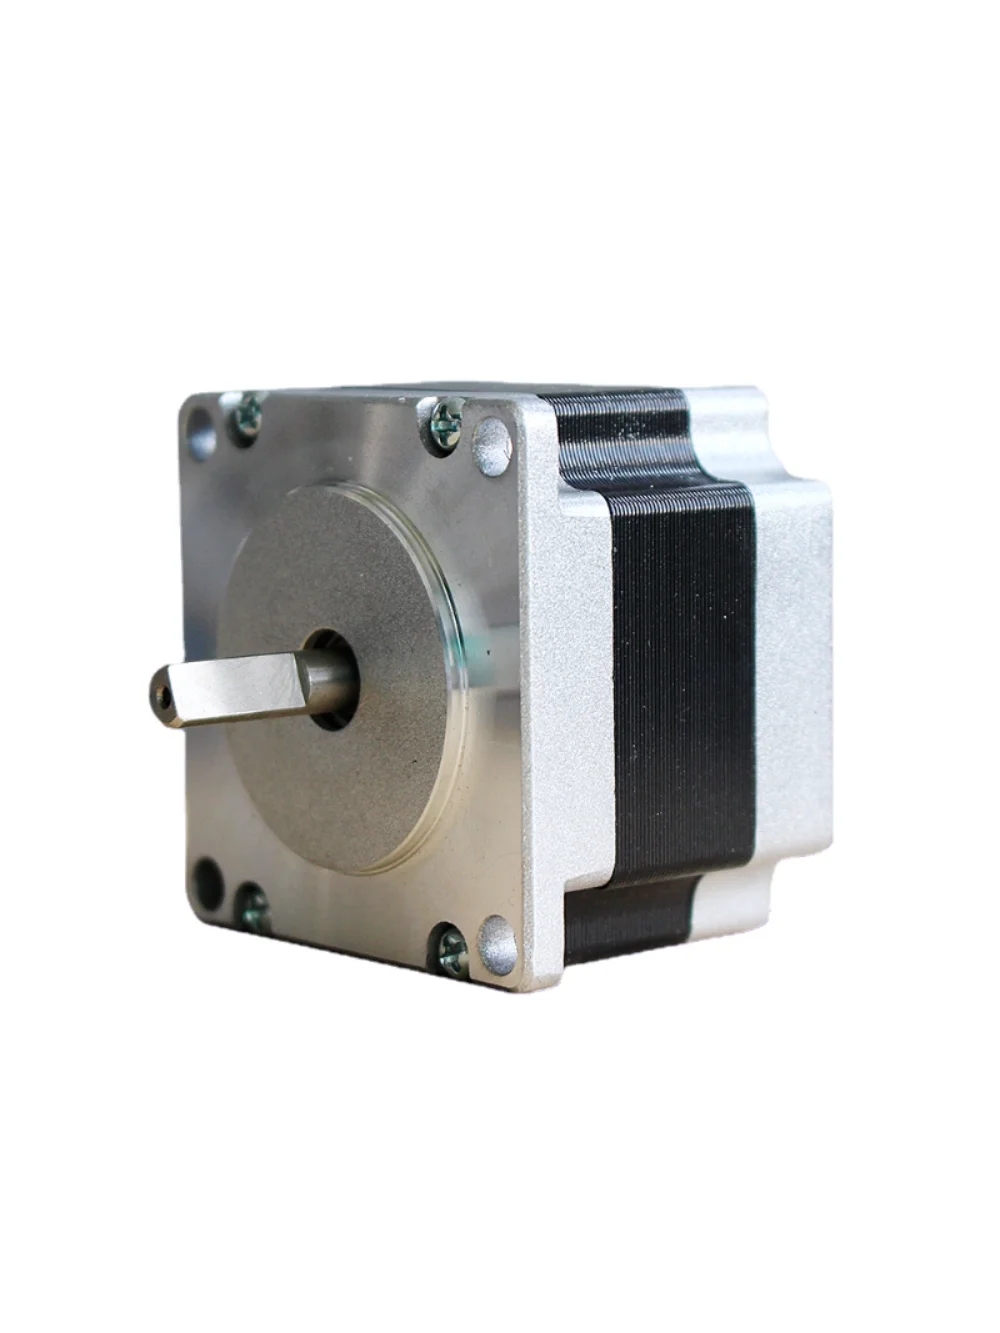 

Two-phase hybrid stepping motor HY57DJ41 57 The torque of stepping motor is 0.4N.m/41mm/4 wire.